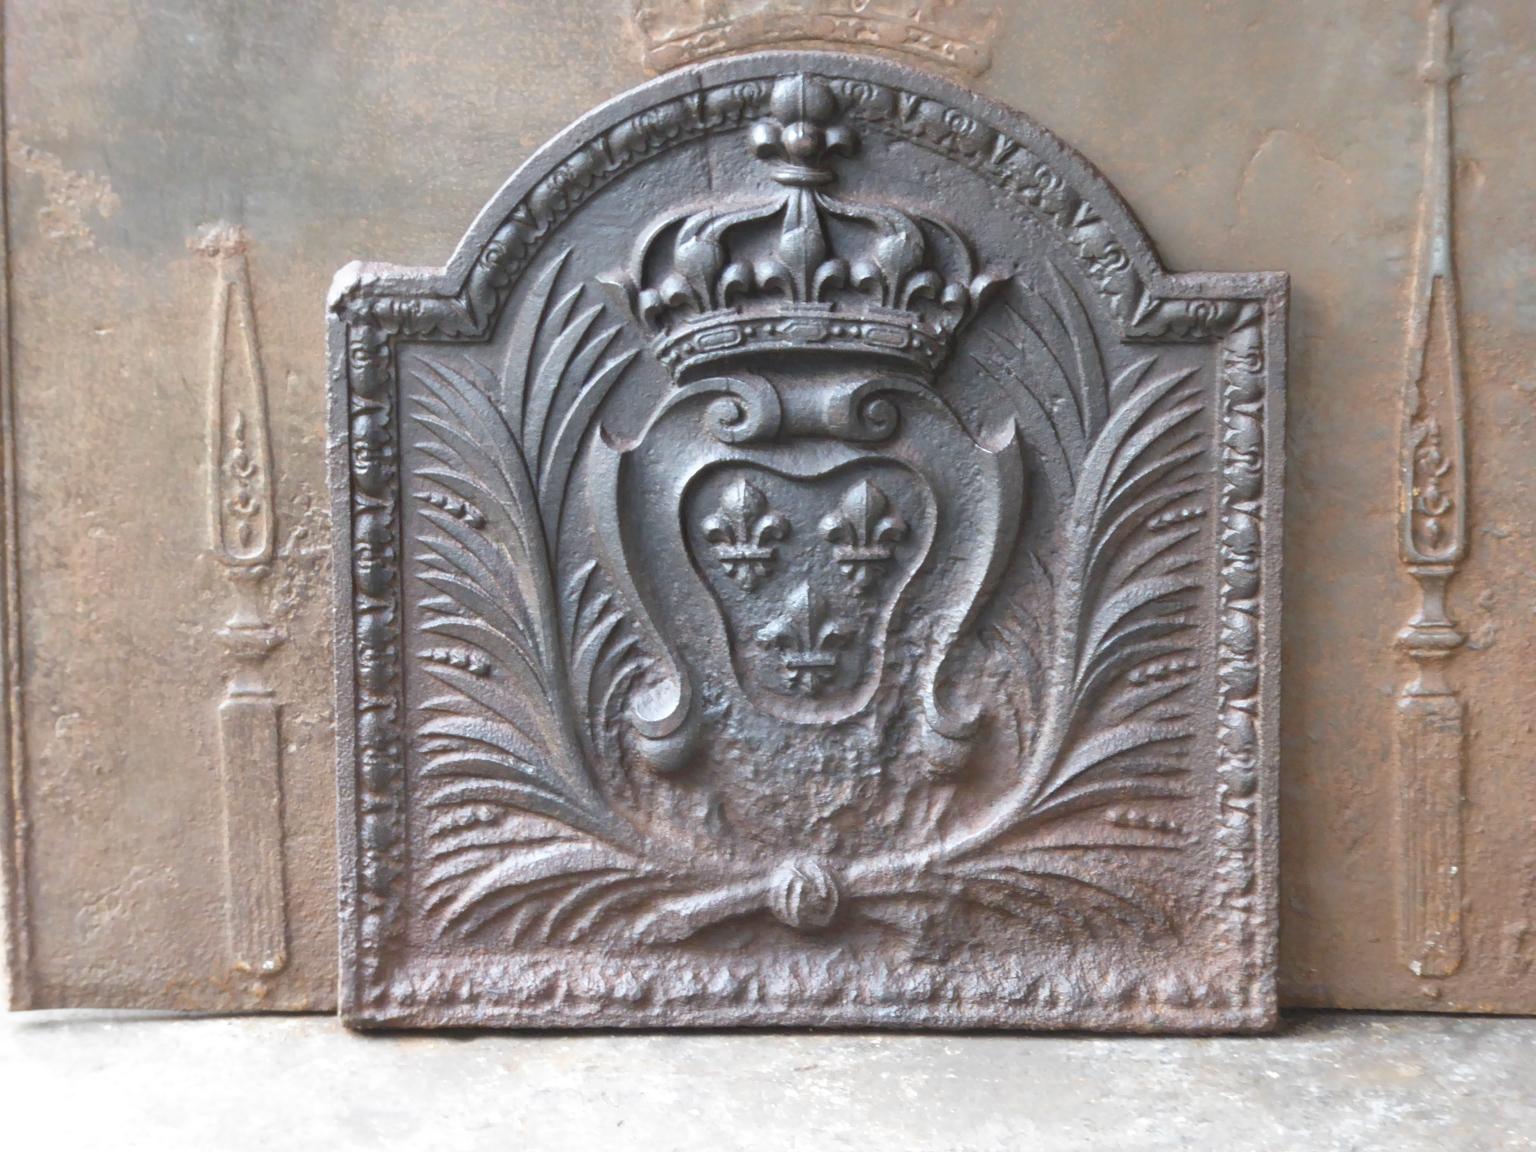 18th century French Louis XV fireback with the arms of France. Coat of arms of the House of Bourbon, an originally French royal house that became a major dynasty in Europe. It delivered kings for Spain (Navarra), France, both Sicilies and Parma.